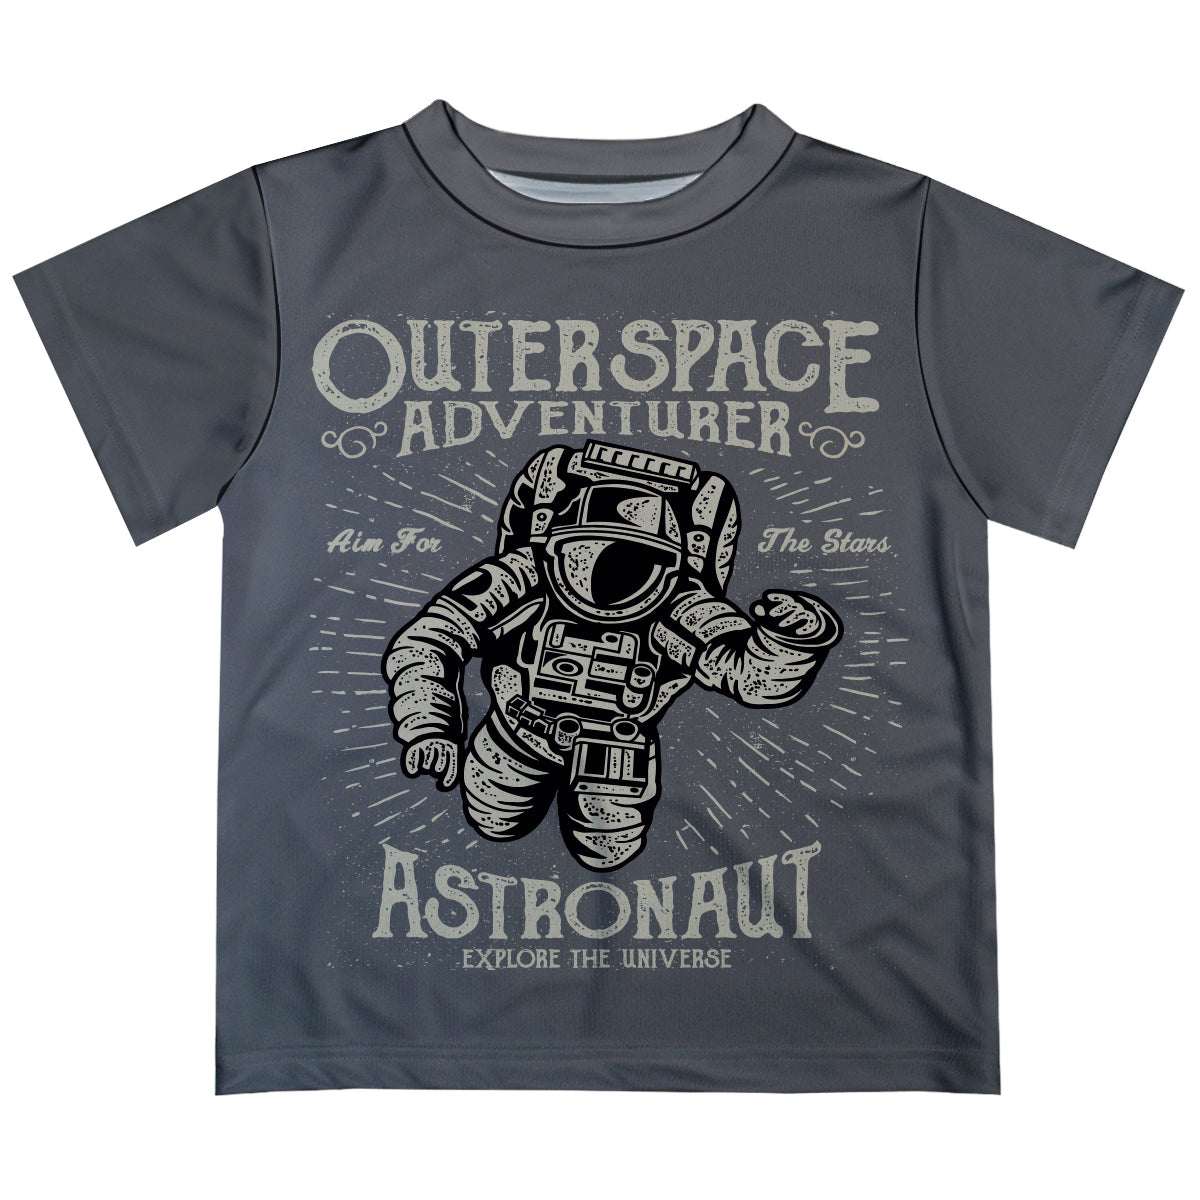 Outer Space Adventure Gray Short Sleeve Tee Shirt - Wimziy&Co.